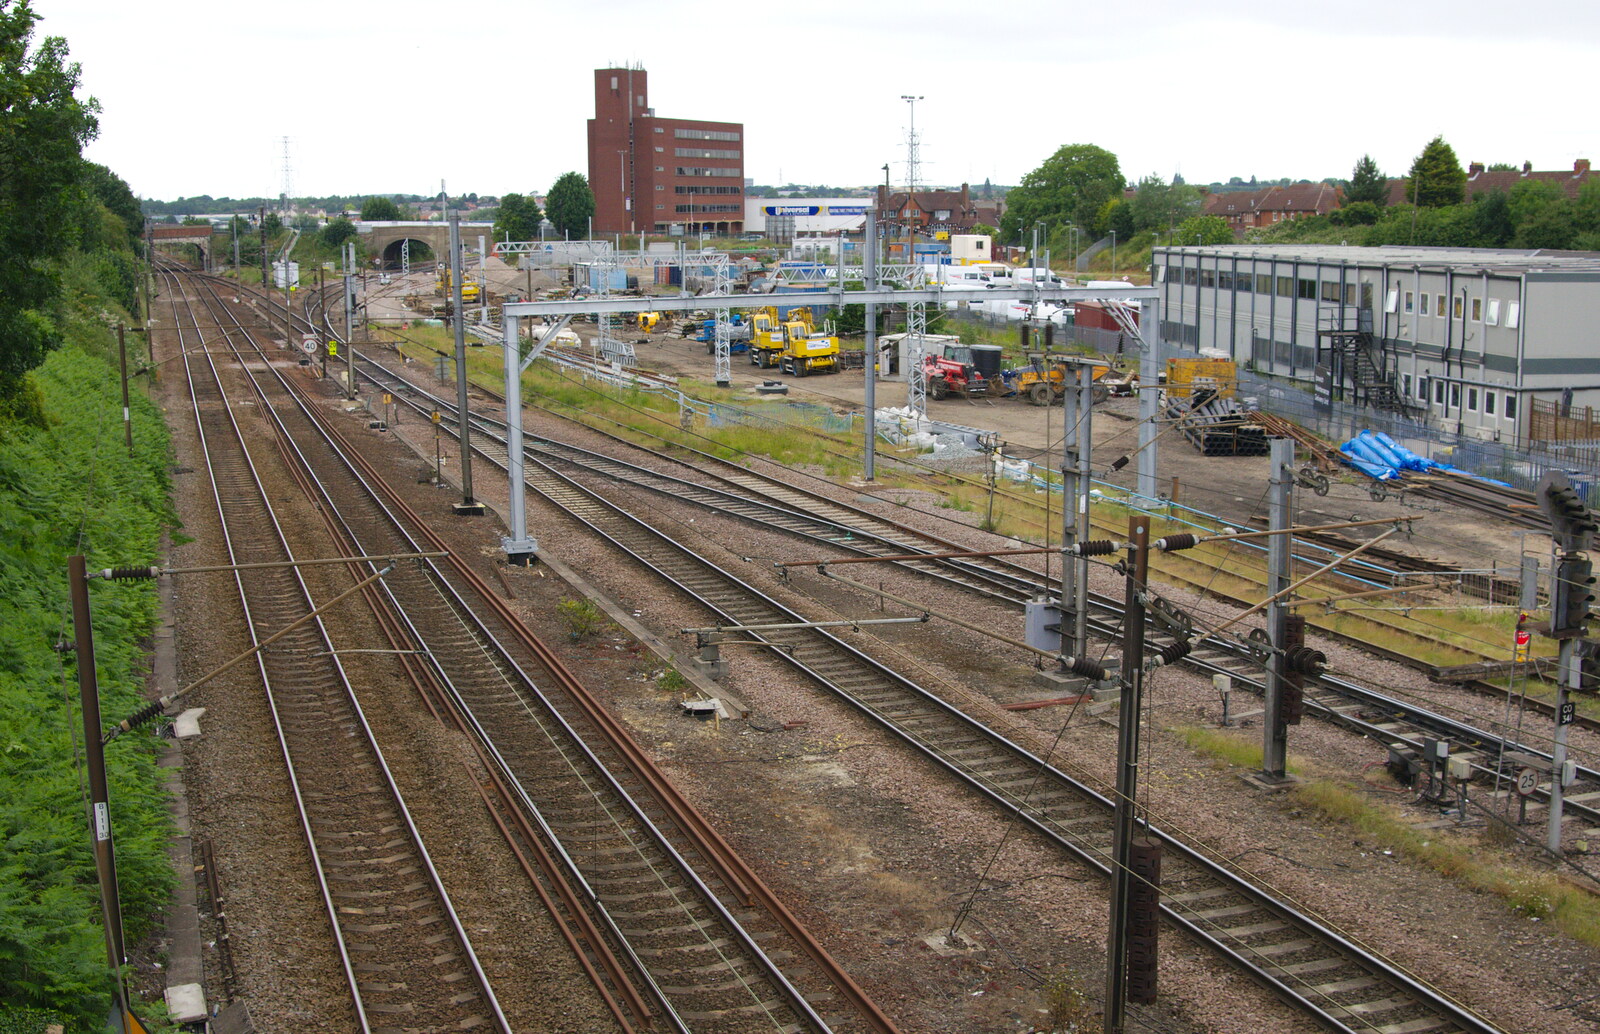 The goods yard by Hadleigh Road from Isobel's Race For Life, Chantry Park, Ipswich - 11th June 2014